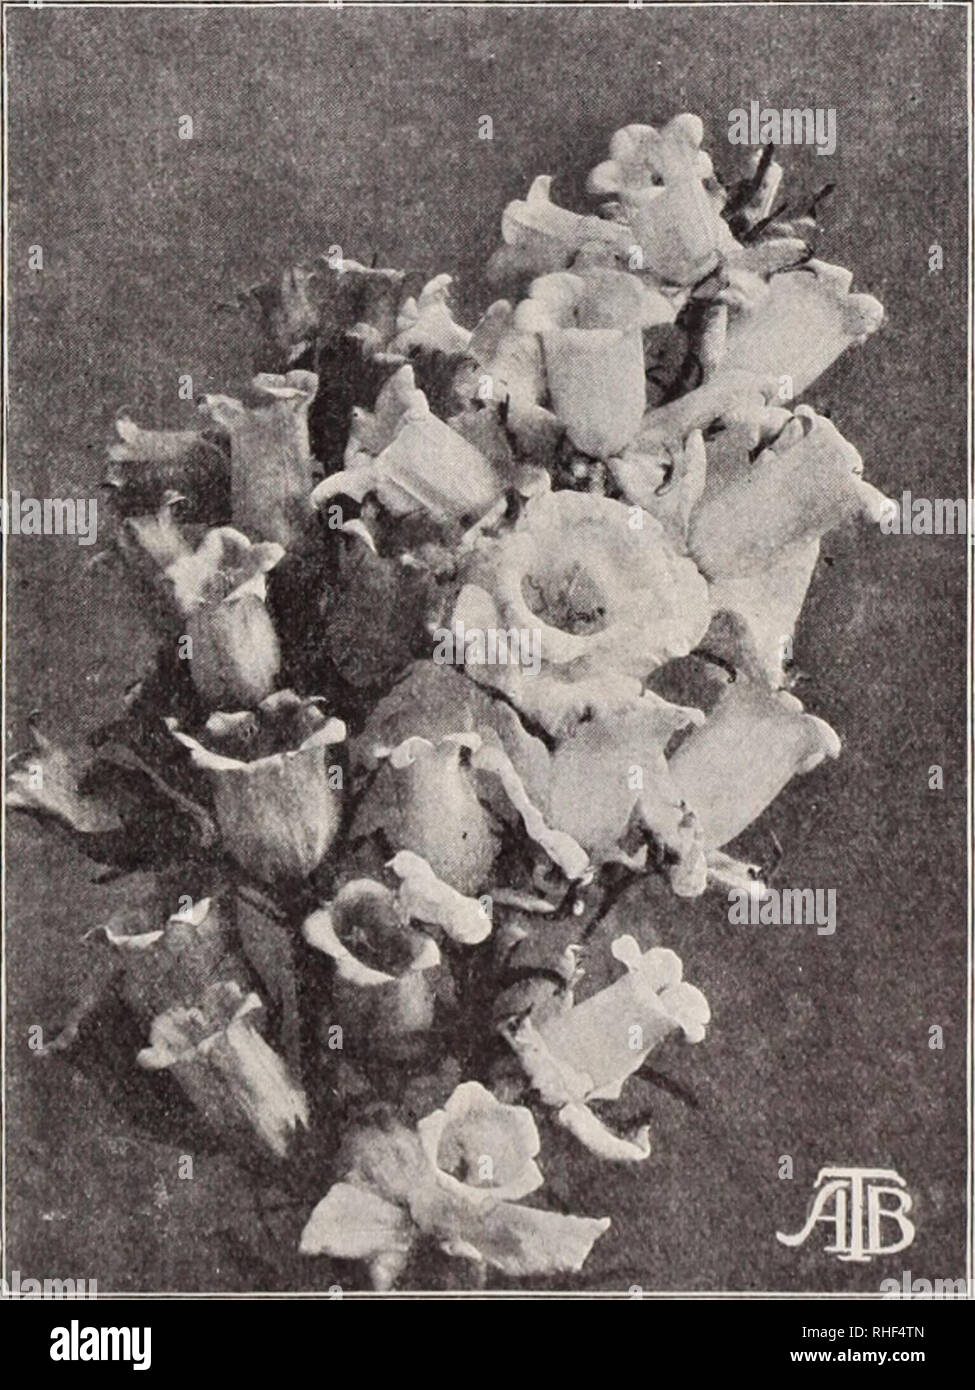 . Boddington's quality bulbs, seeds and plants / Arthur T. Boddington.. Nursery Catalogue. BODDINGTON'S '^yUa£l{yi/ SEEDS 13 Calceolaria Hybrida, Boddington's Perfection The herbaceous Calceolaria is an easily cultivated plant. So long as frost is excludetl from the plants in winter they are jierfectly safe, and to attempt to hasten growth at any time is a faiUire. July is the best month for sowing the seed. The great advance made in tlie habit of the strains otiiered is remarkable, whilst in tin- cohirs there is a marked improvement. Saved by E^nglanil's most famous spe- cialists. Monster flo Stock Photo